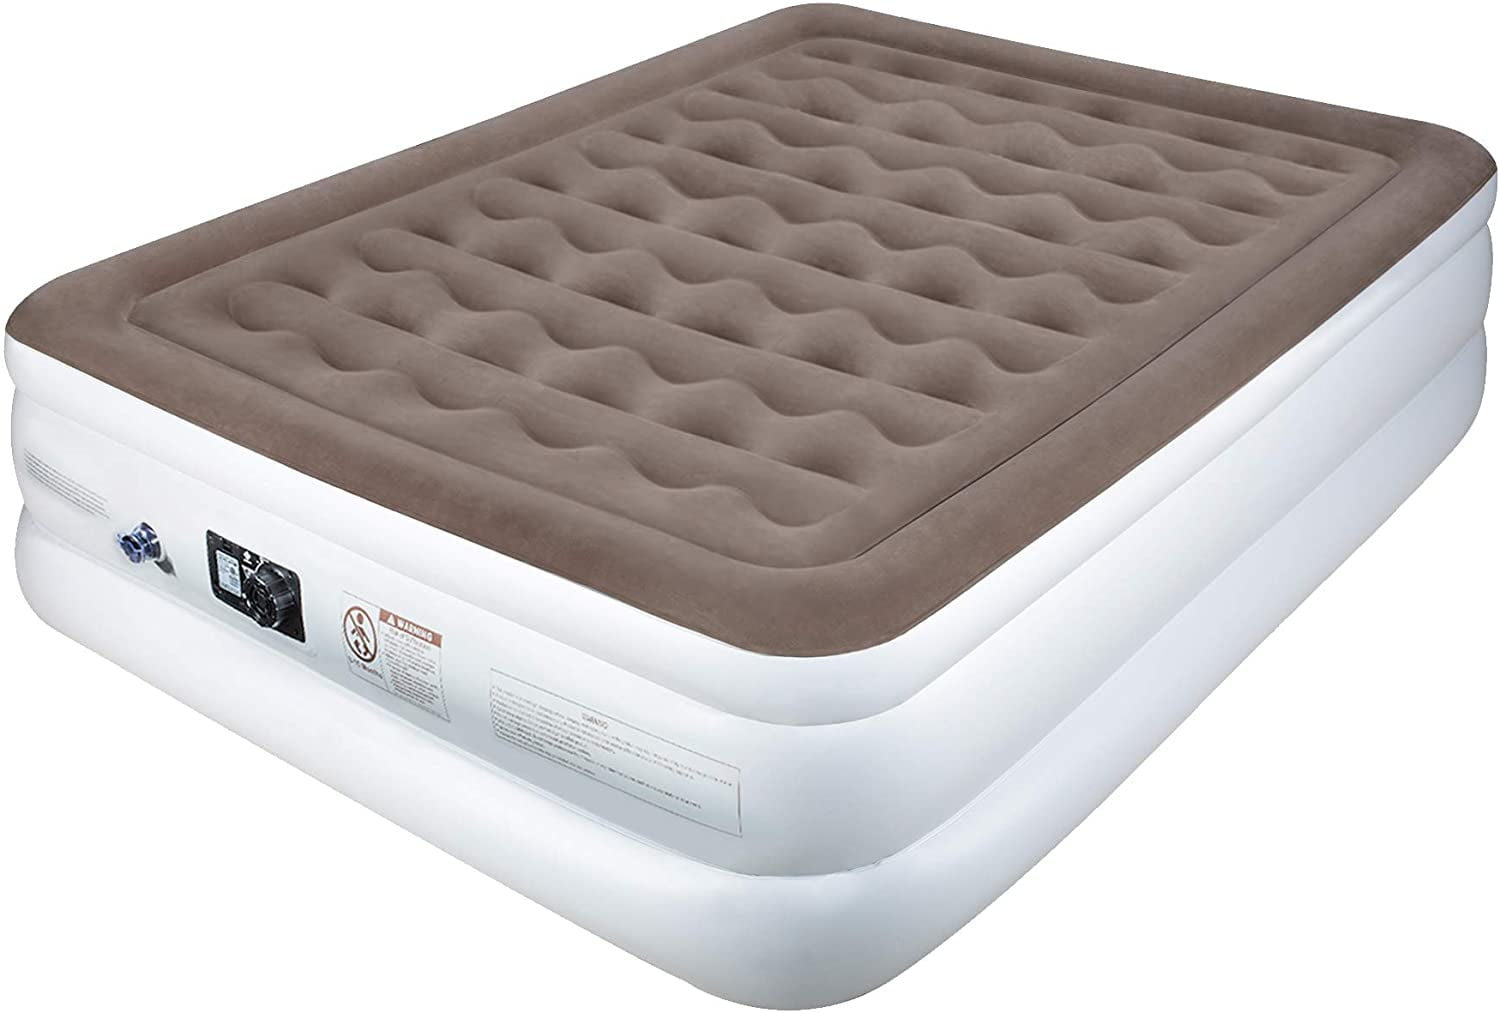 queen size airbed mattress with built-in pump